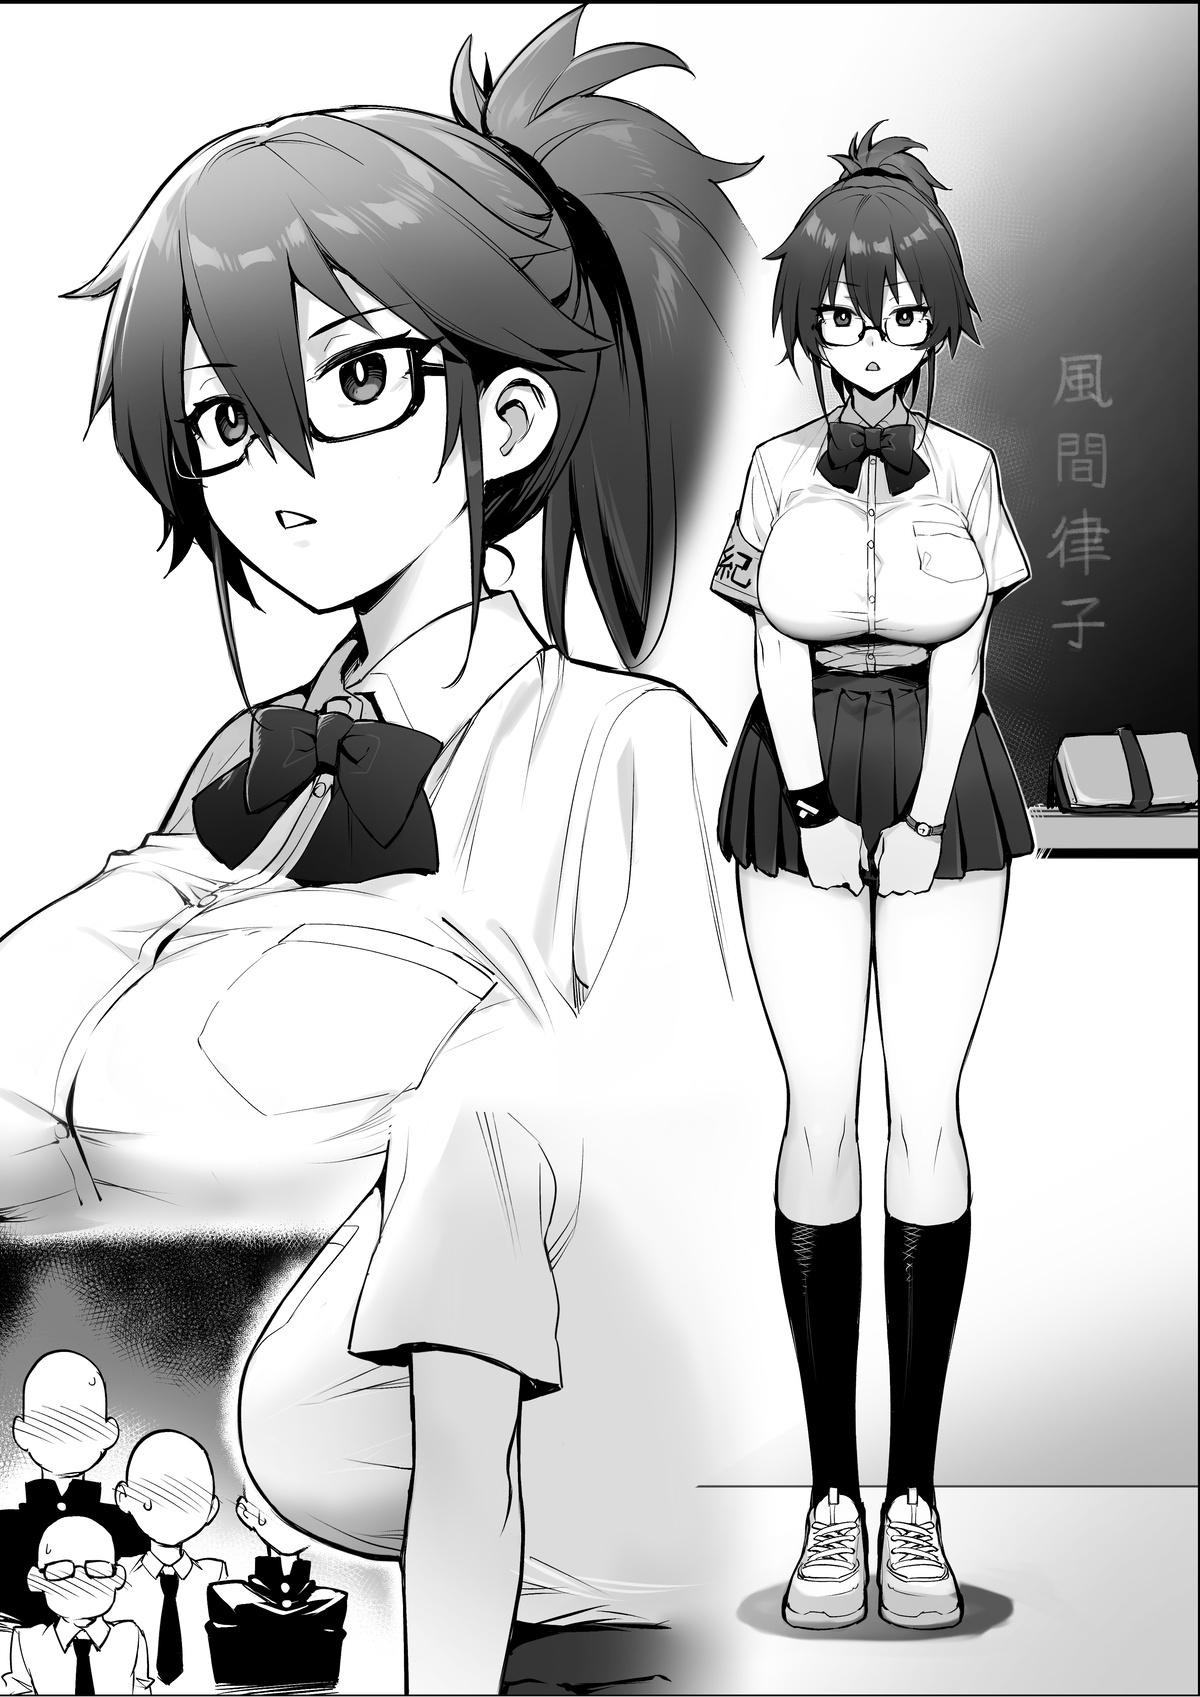 Rumor Has It That The New Chairman of Disciplinary Committee Has Huge Breasts. 24